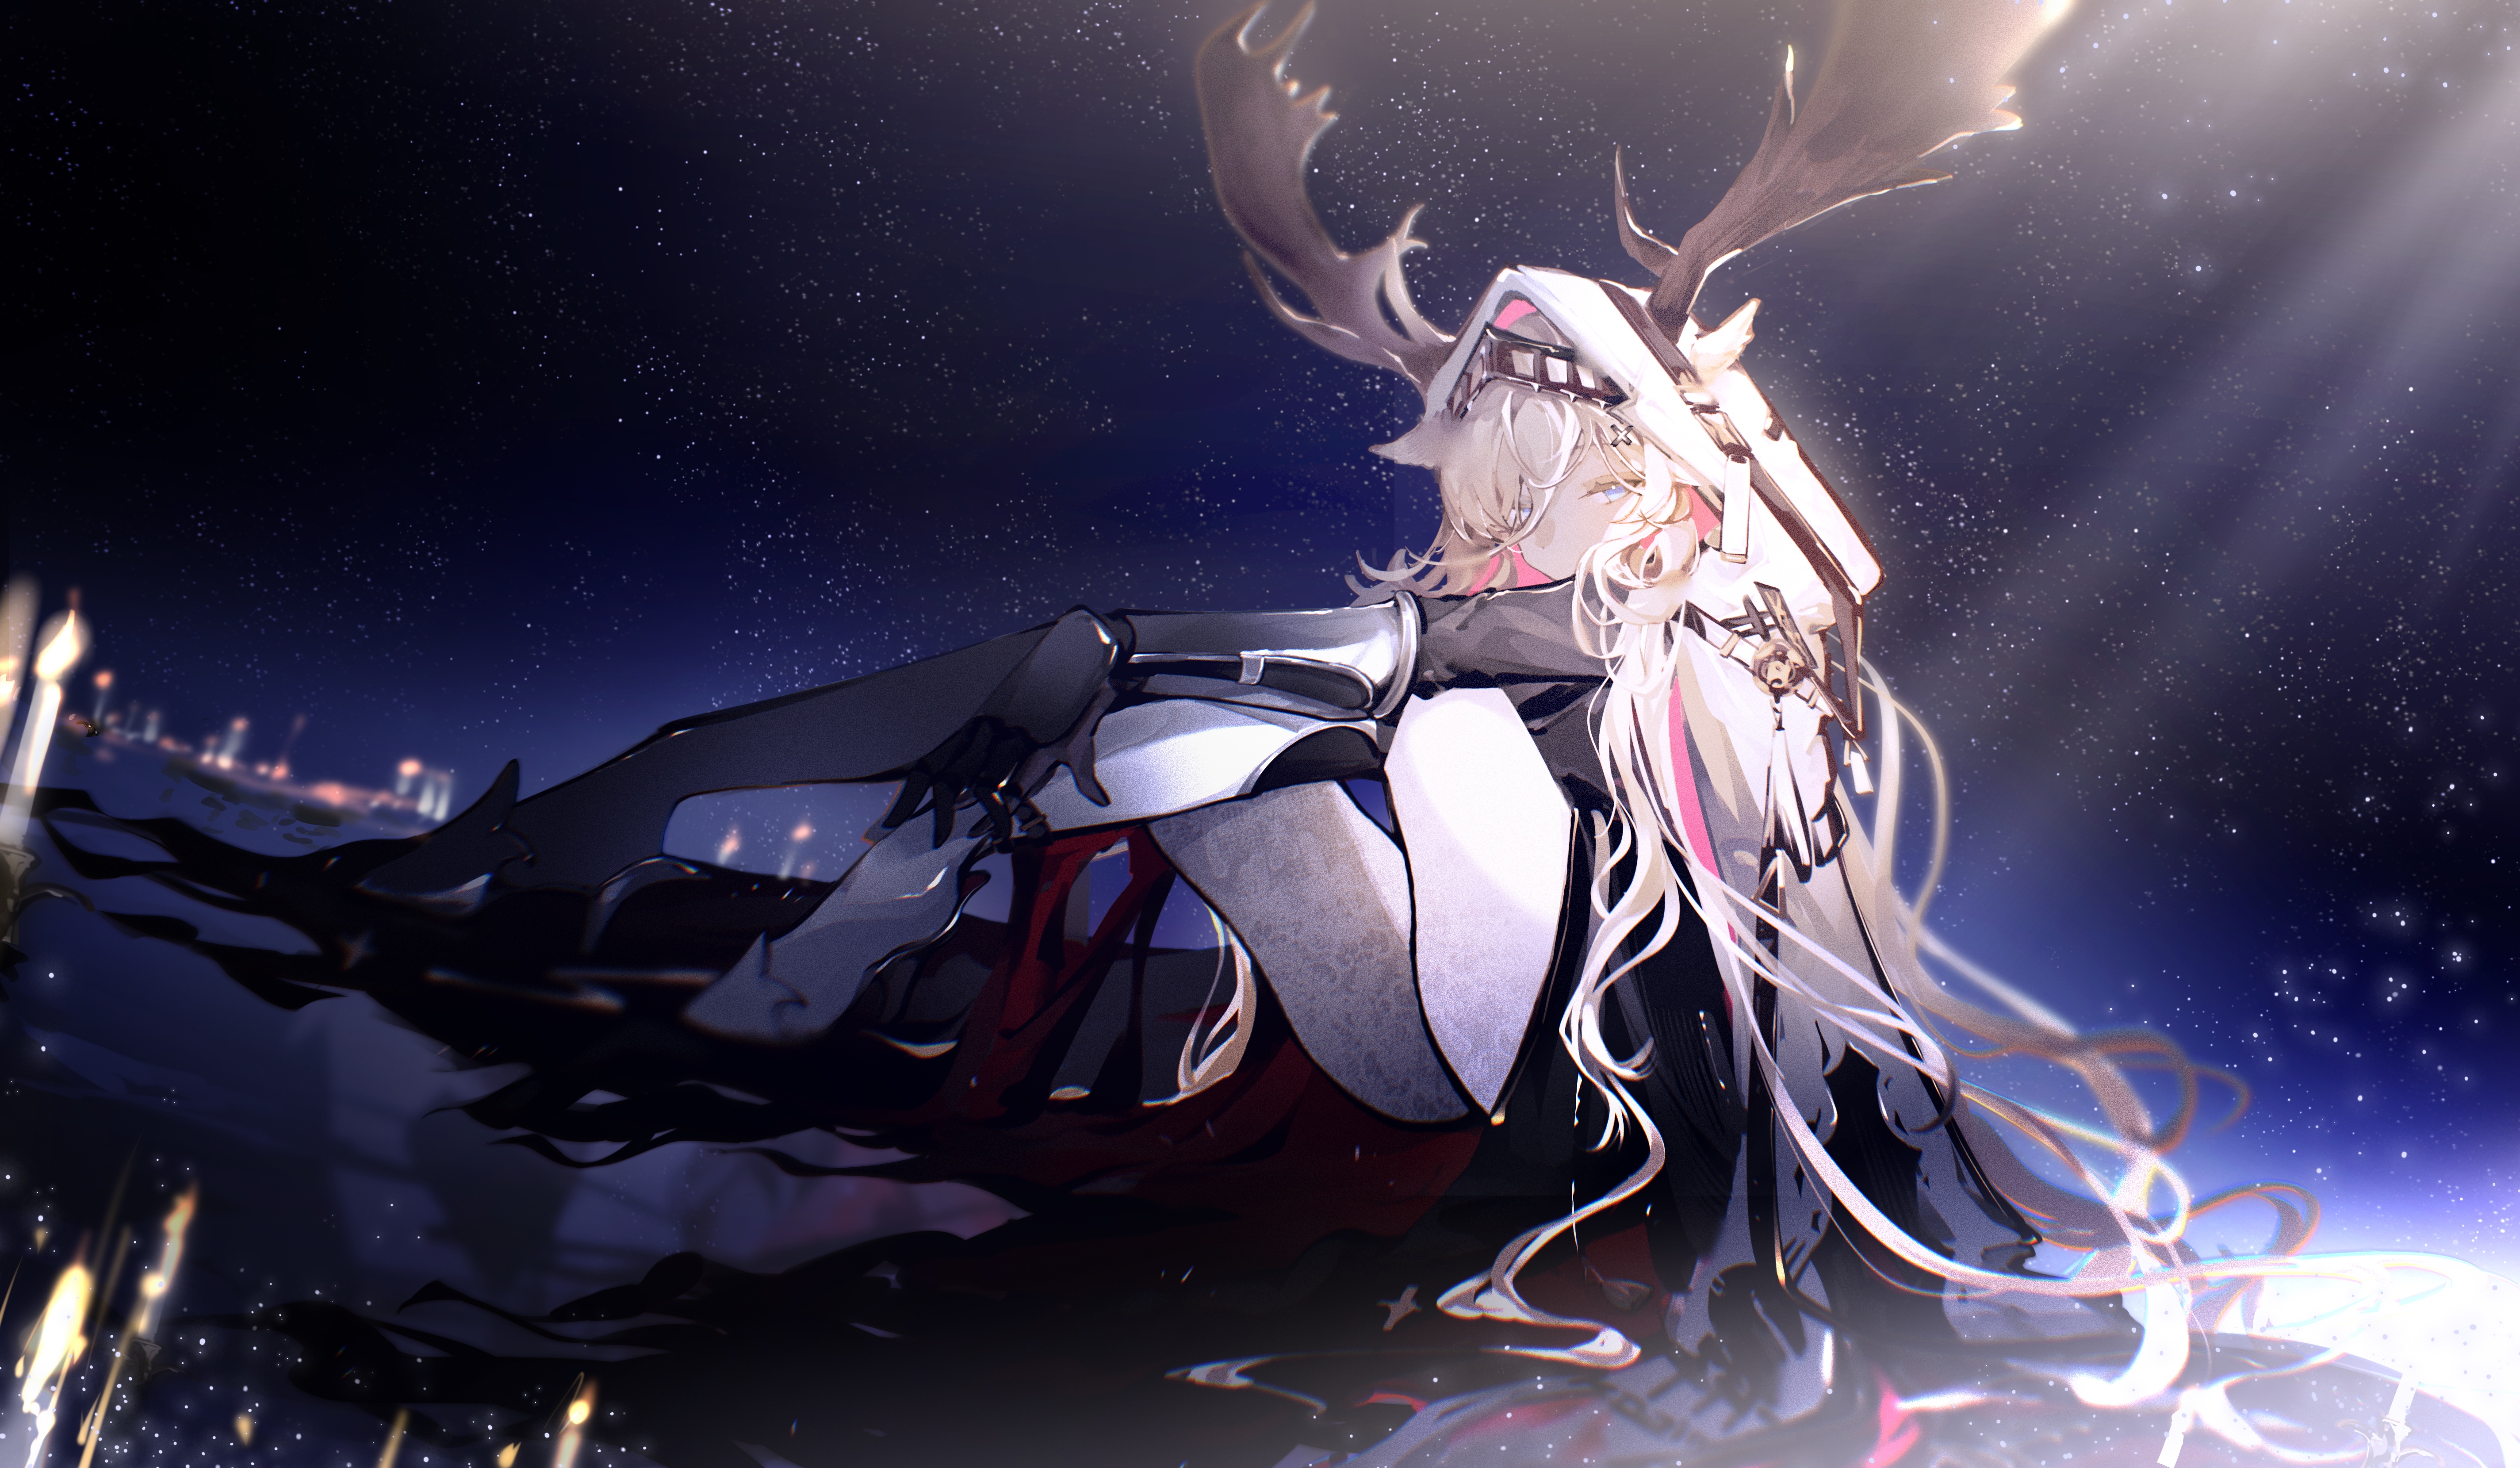 long hair, anime, anime girls, candles, stars, reflection, Arknights, The Candle  Knight Viviana (Arknights) | 5698x3319 Wallpaper - wallhaven.cc